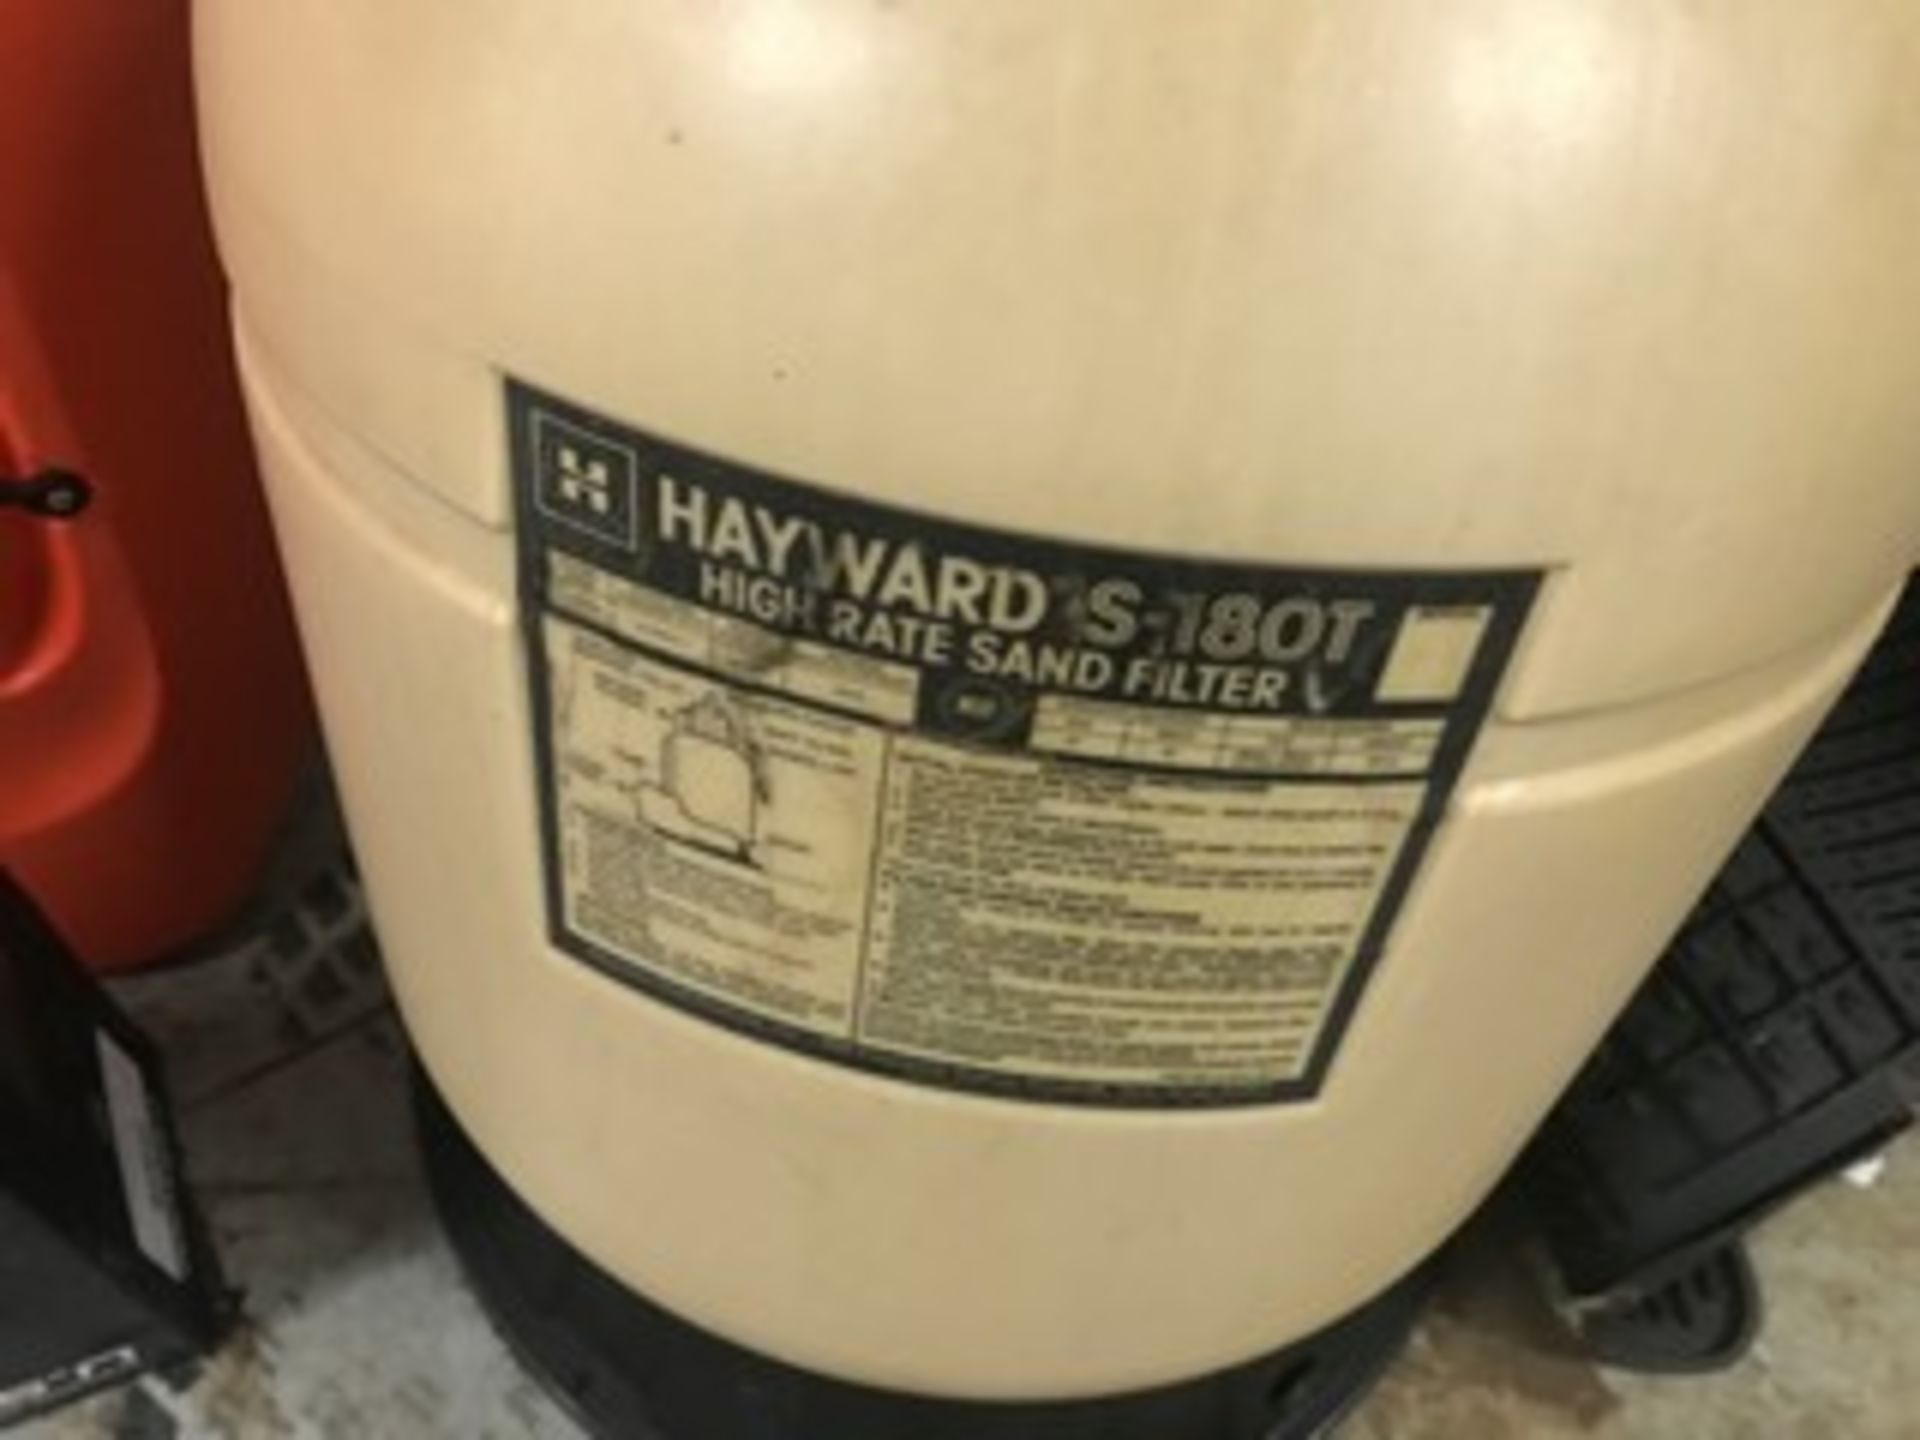 HAYWARD S-180-T SAND FILTER - Image 3 of 3